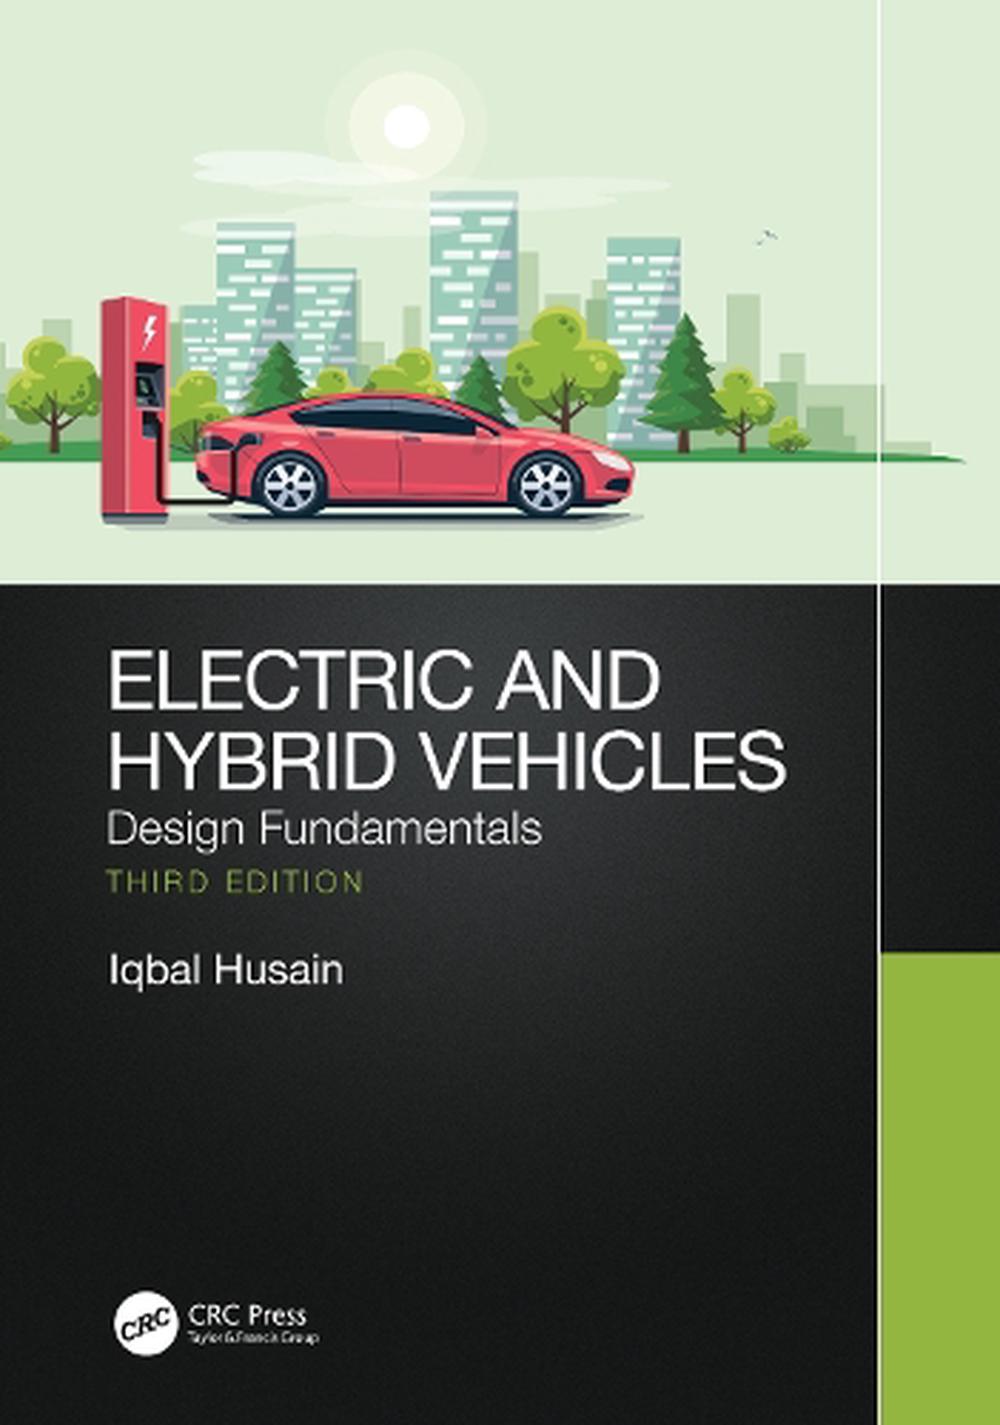 Electric and Hybrid Vehicles by Iqbal Husain Free Shipping